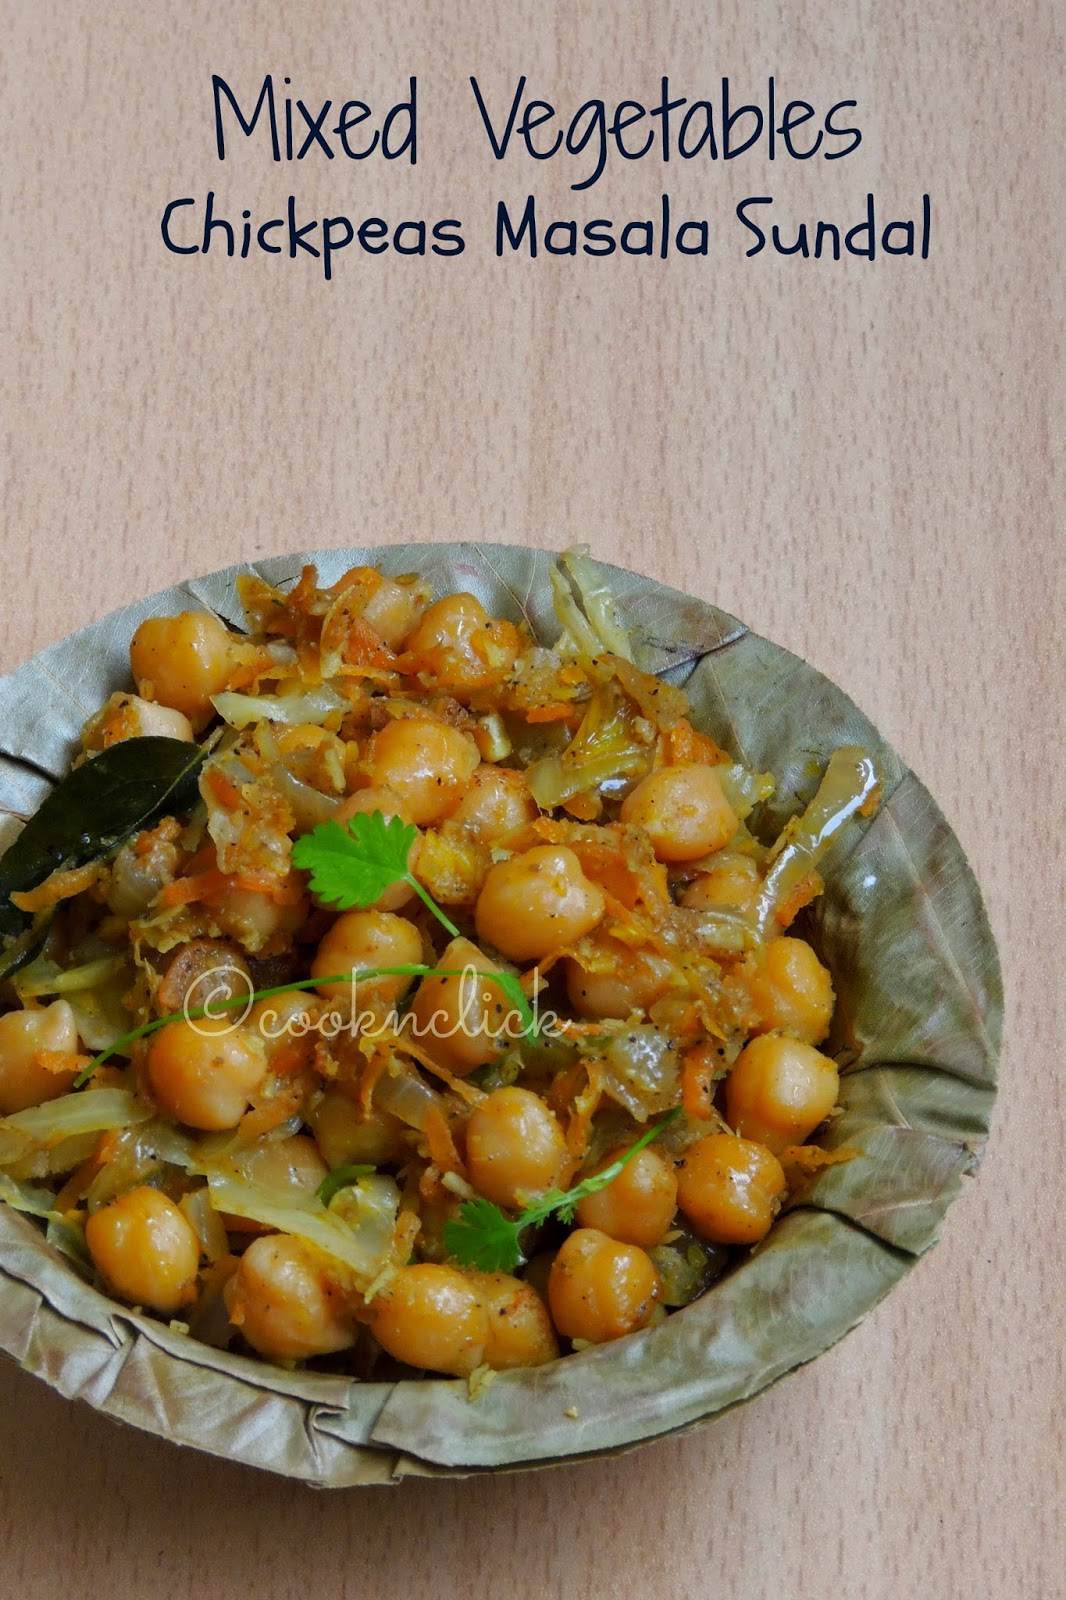 Mixed Vegetable Channa sundal, Chickpeas mixed vegetable sundal, Chickpeas masala sundal